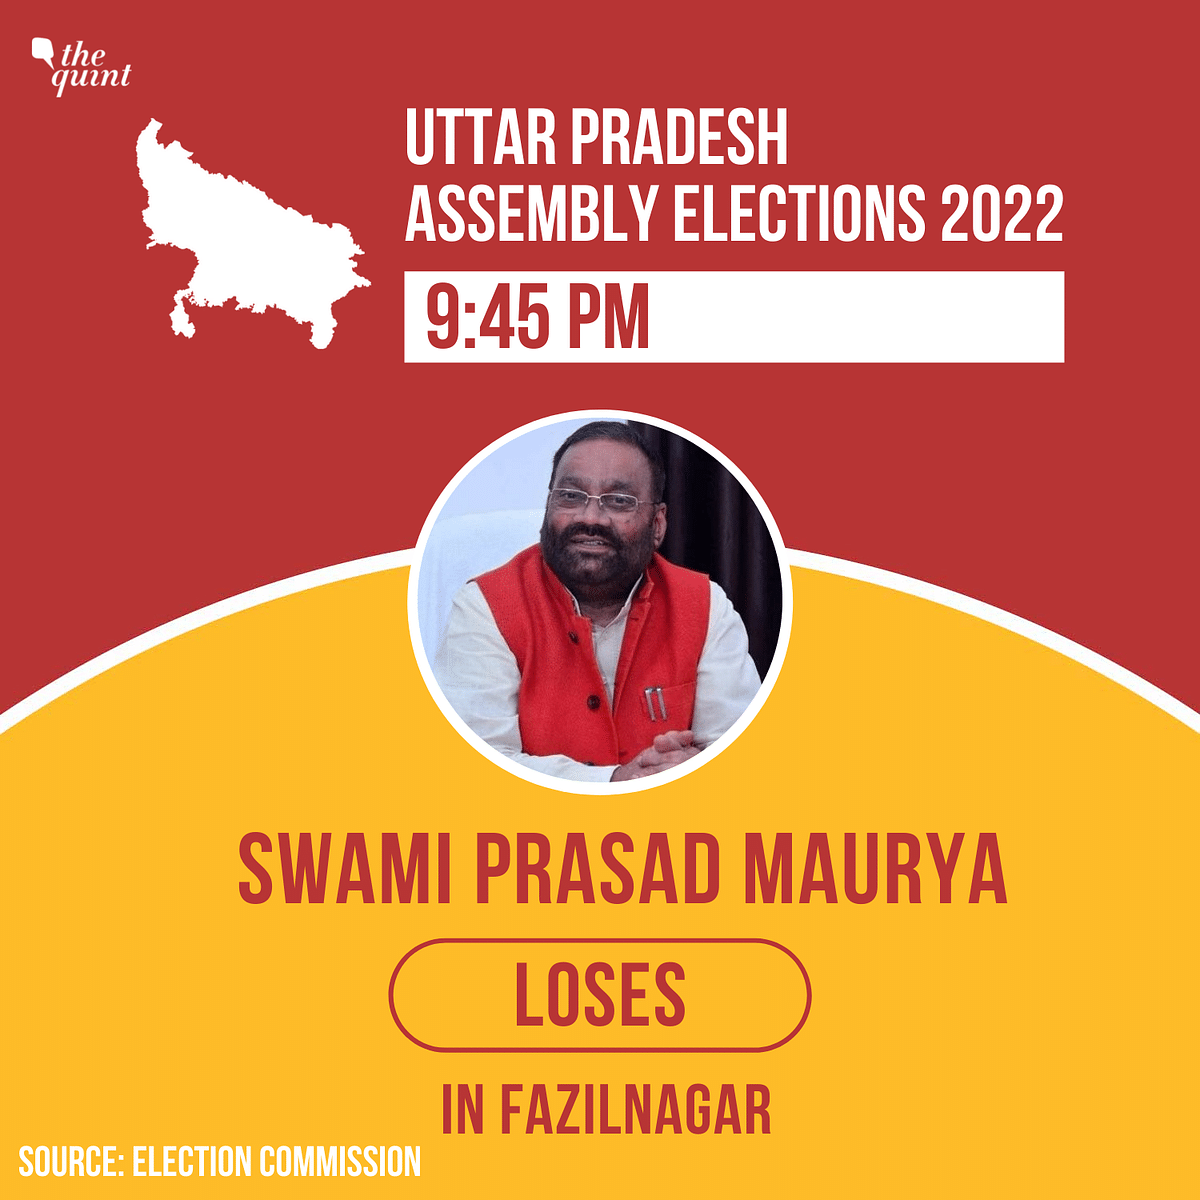 Catch all the live updates of the Uttar Pradesh Assembly elections 2022 results here.